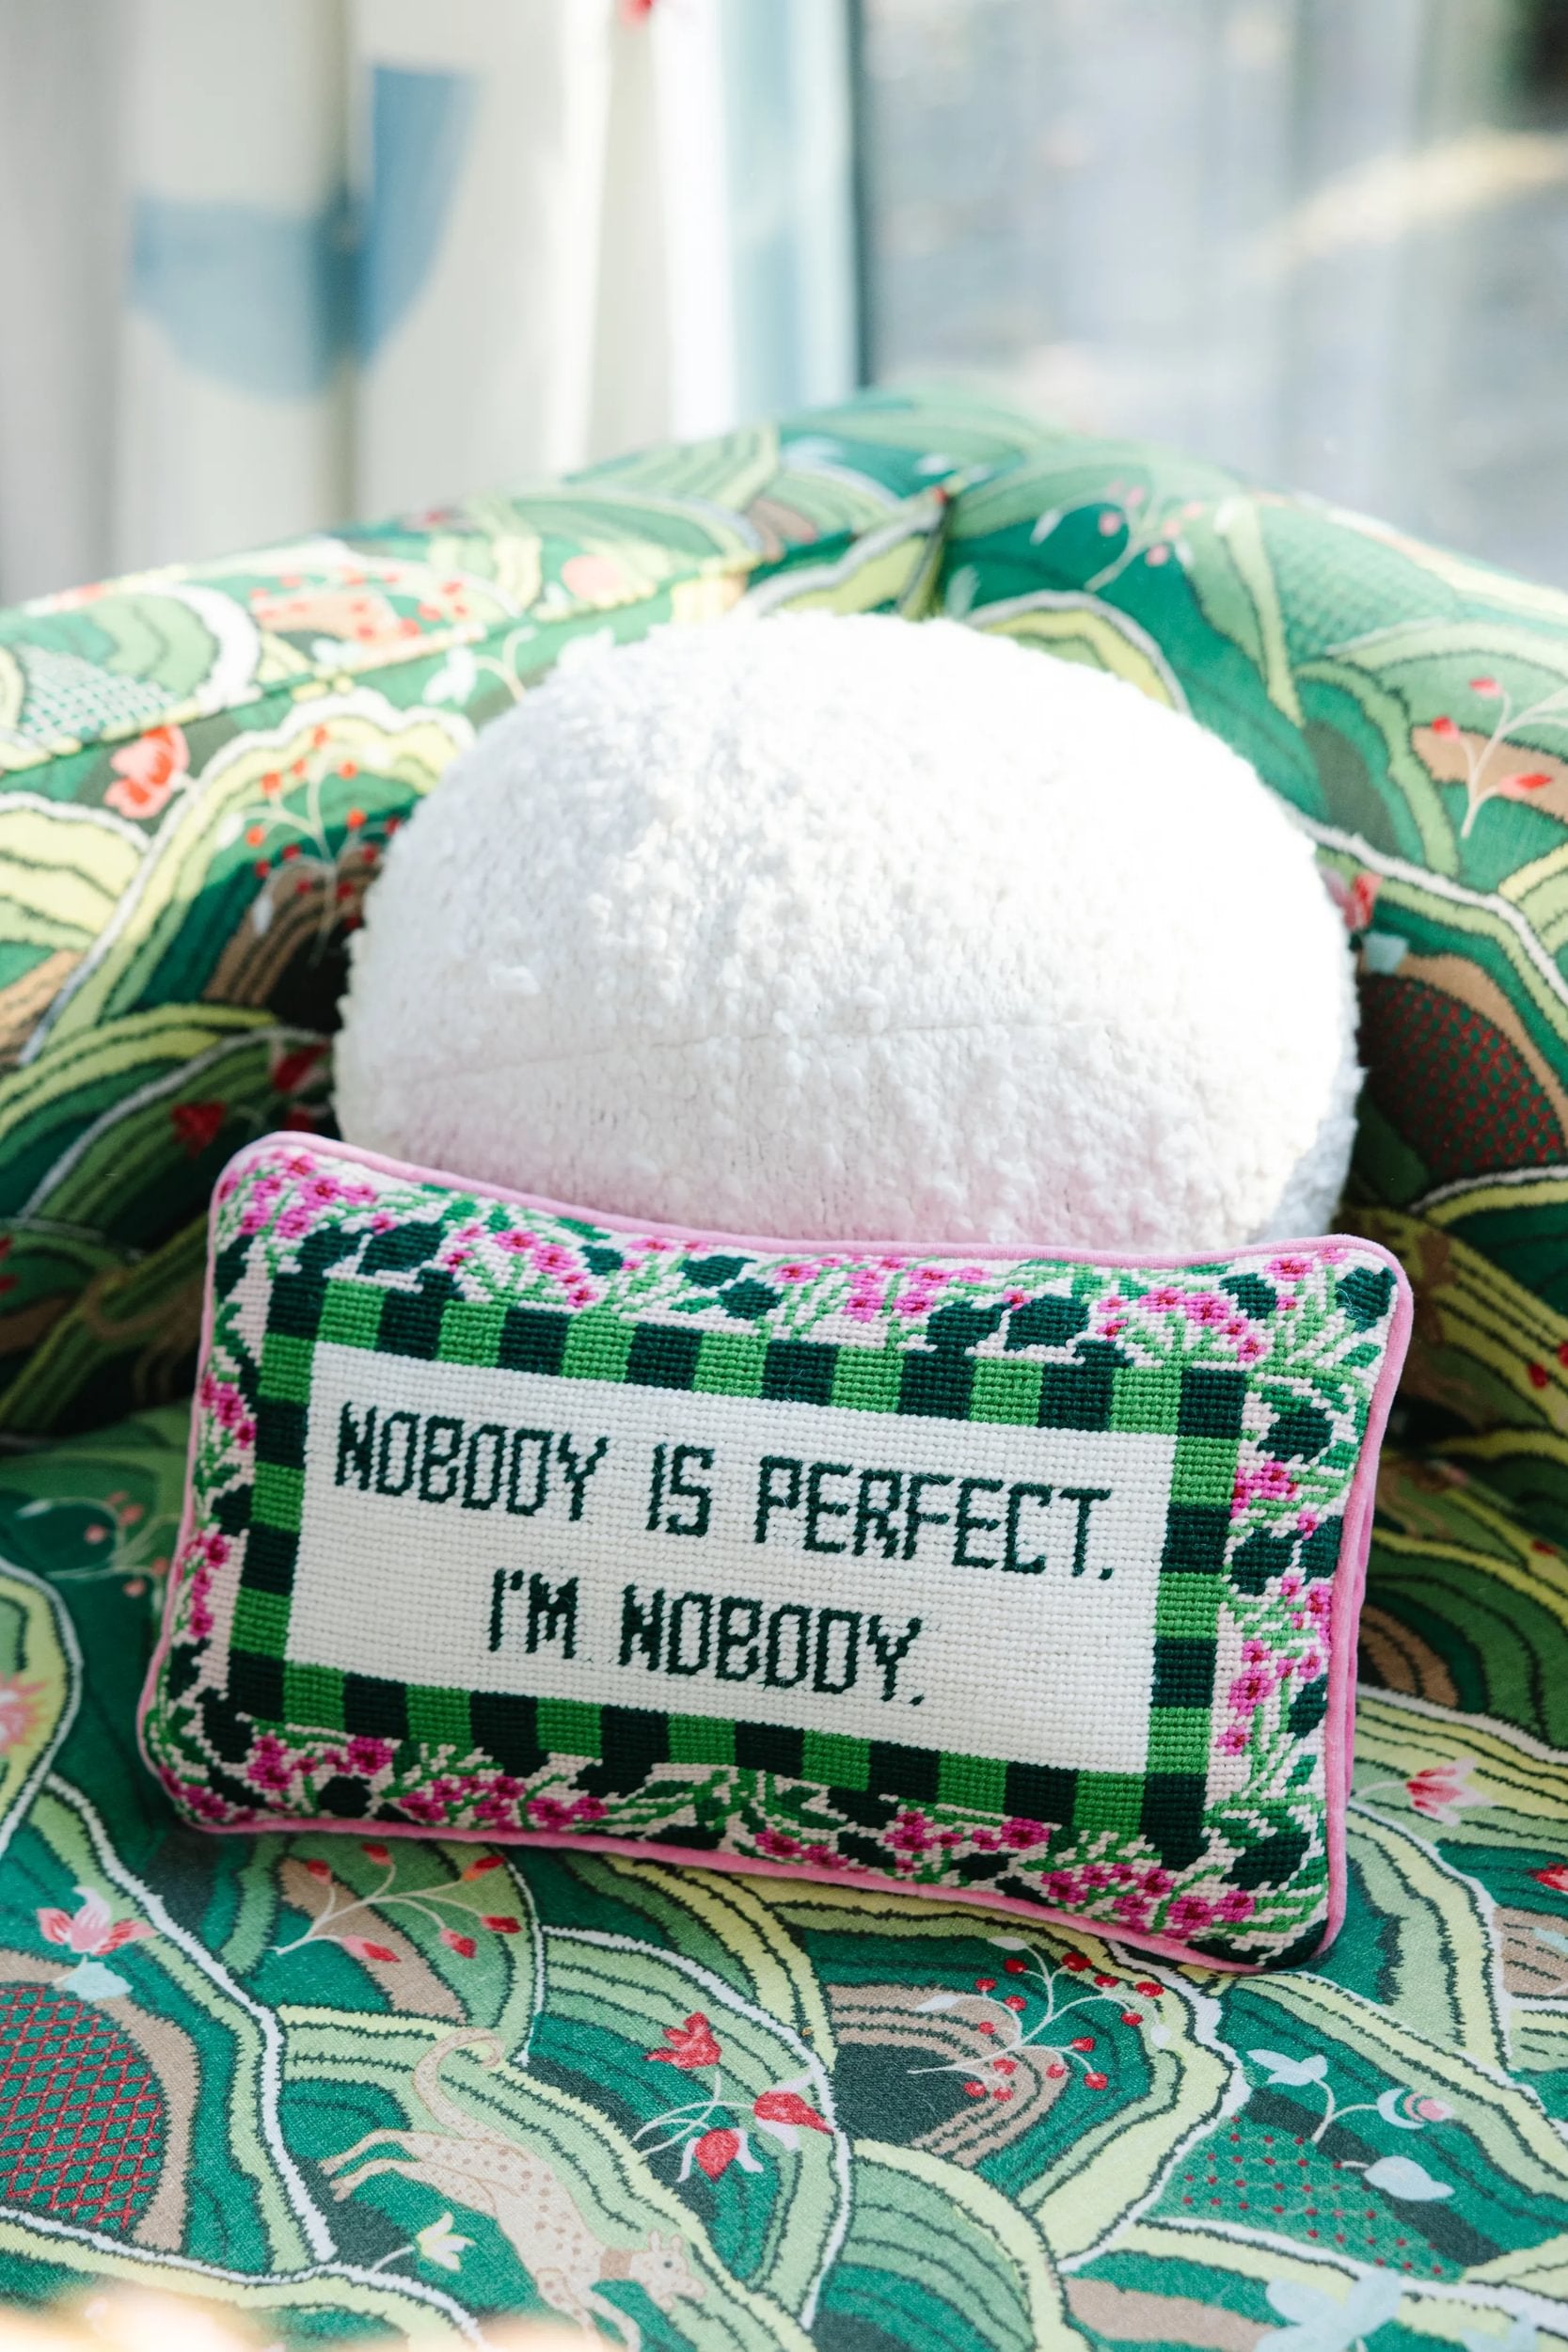 Nobody is Perfect Needlepoint Pillow